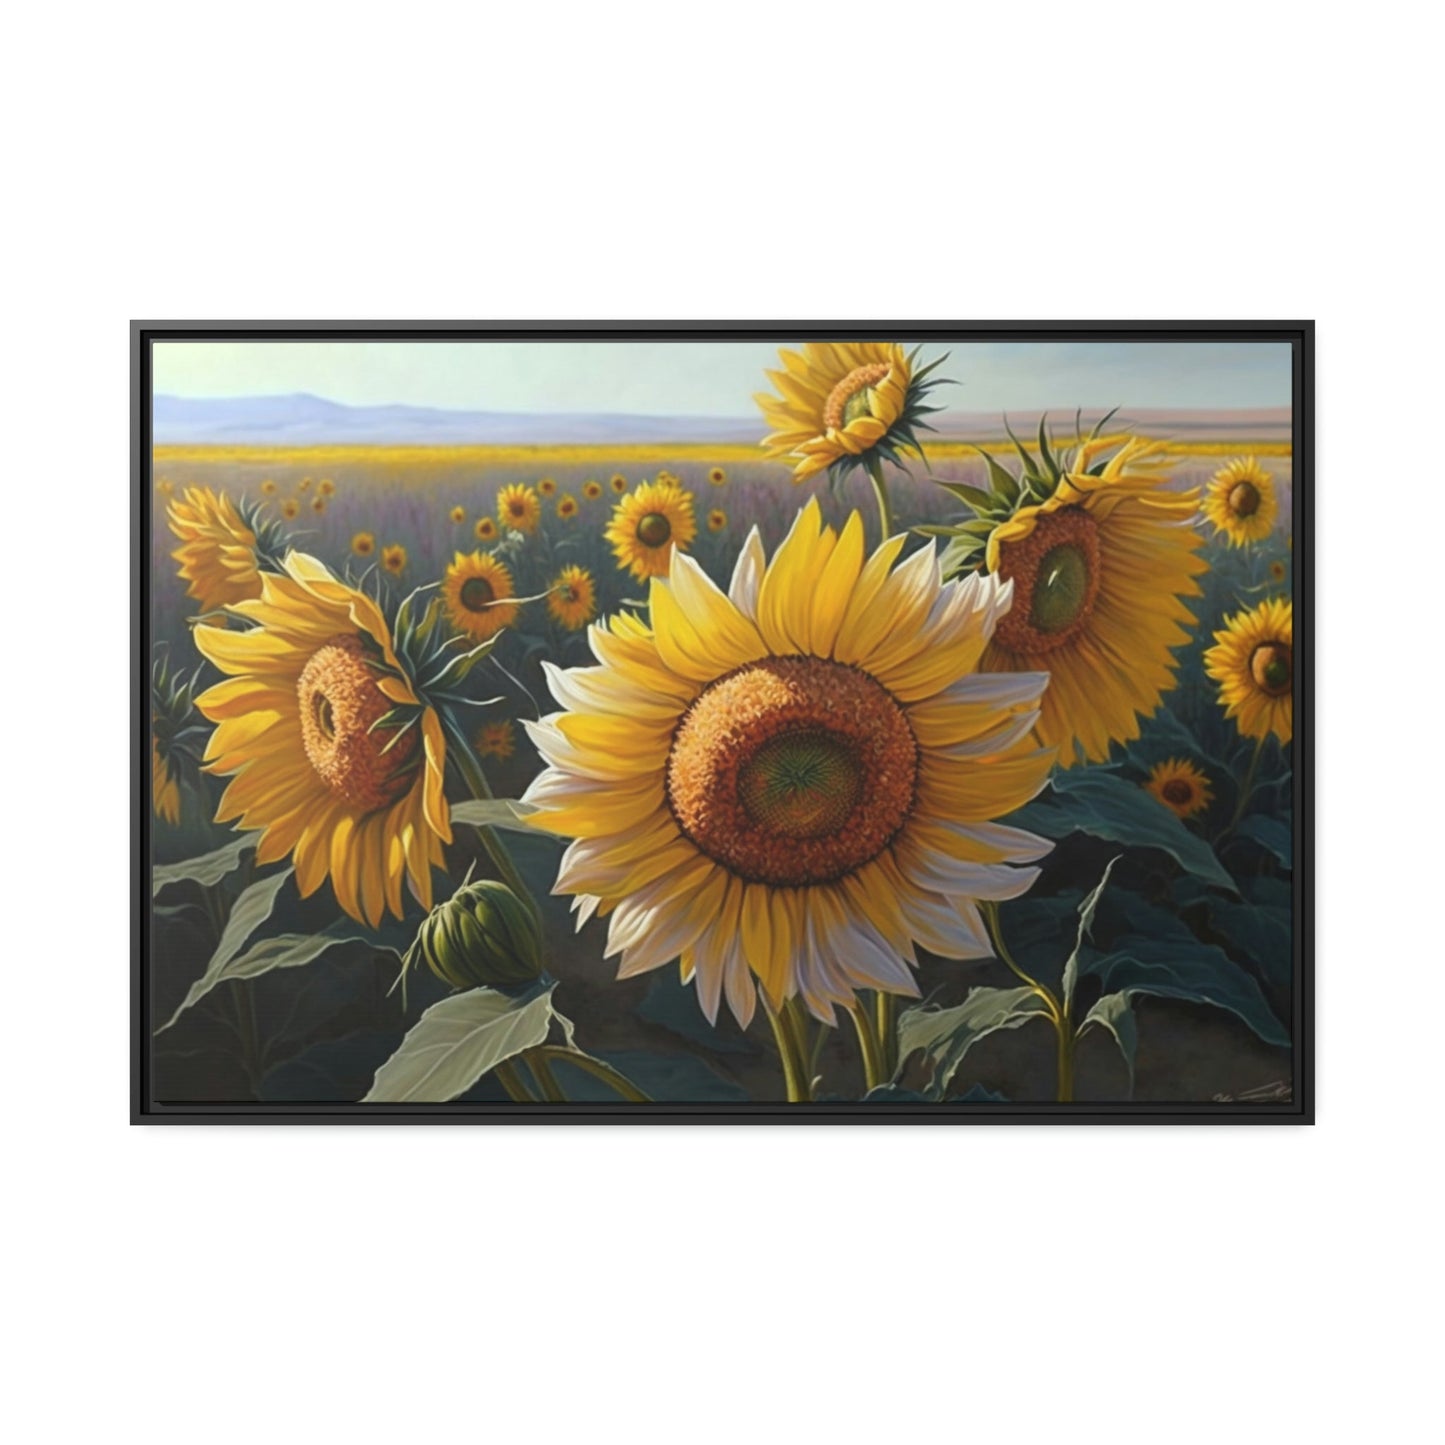 Sunflower Serenade: A Rhapsody of Color and Light in Nature's Garden